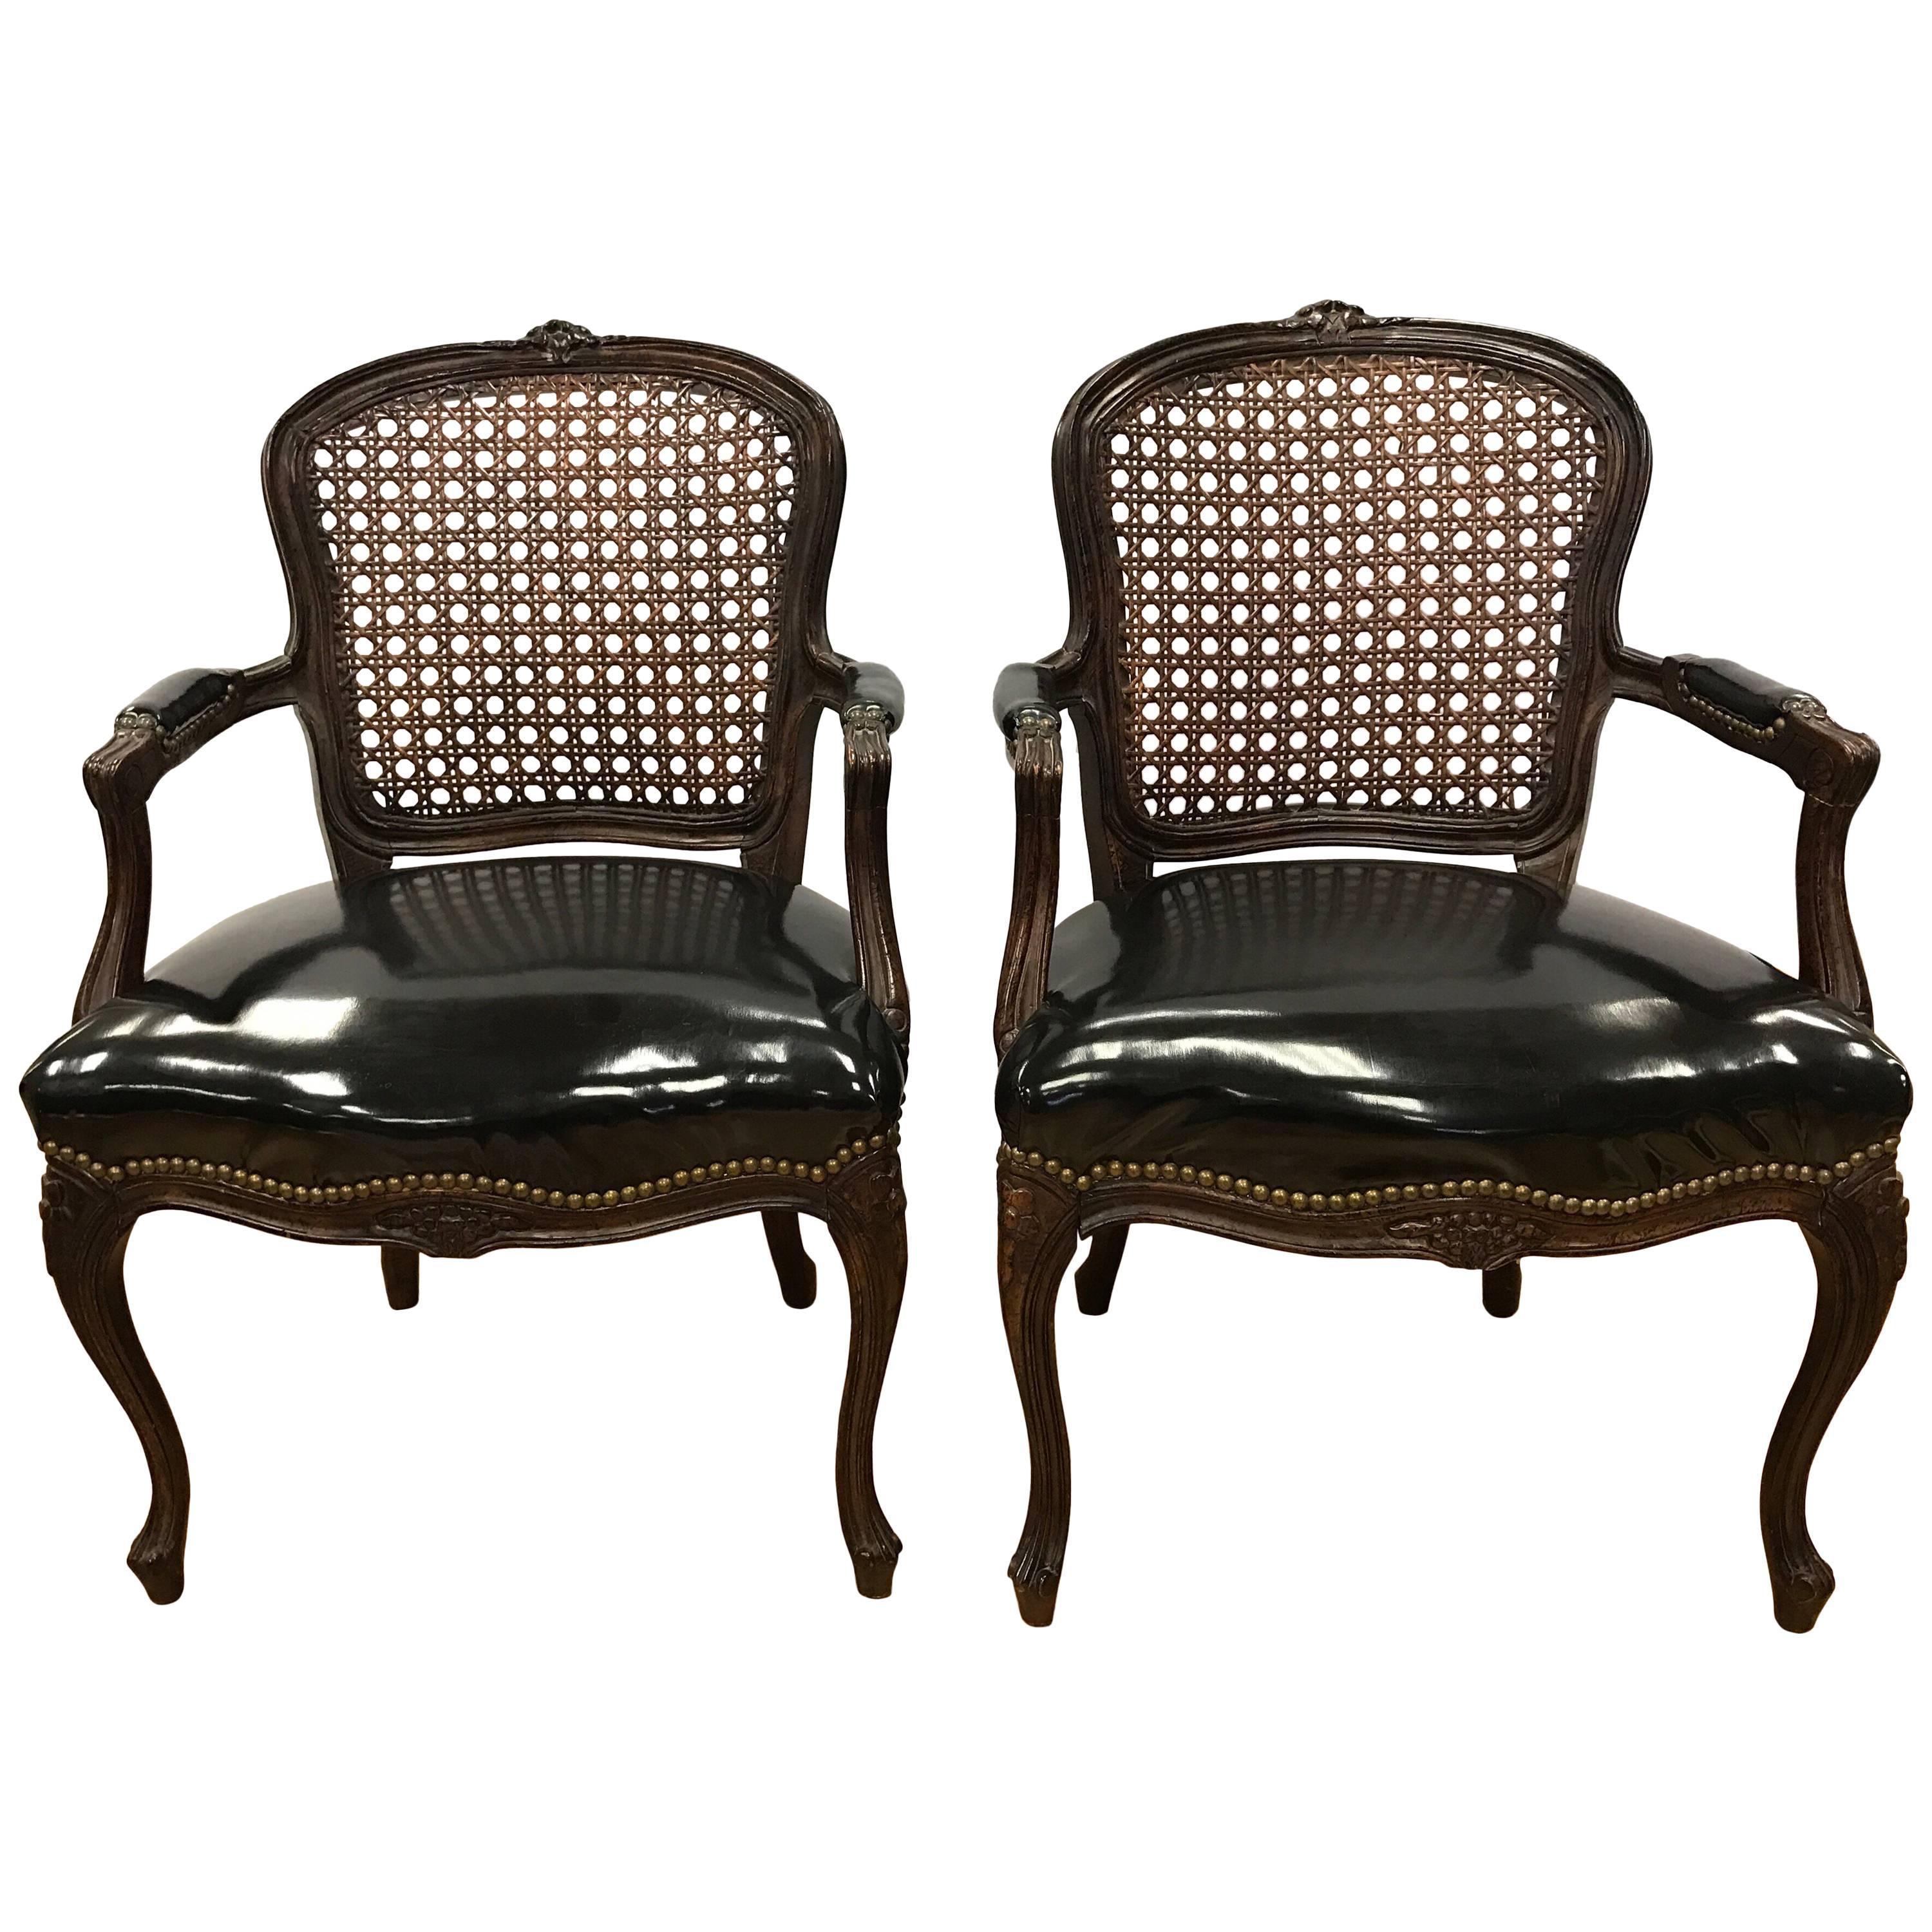 Pair of Cane Back French Louis XV Carved Chairs with Black Patent Leather Seats